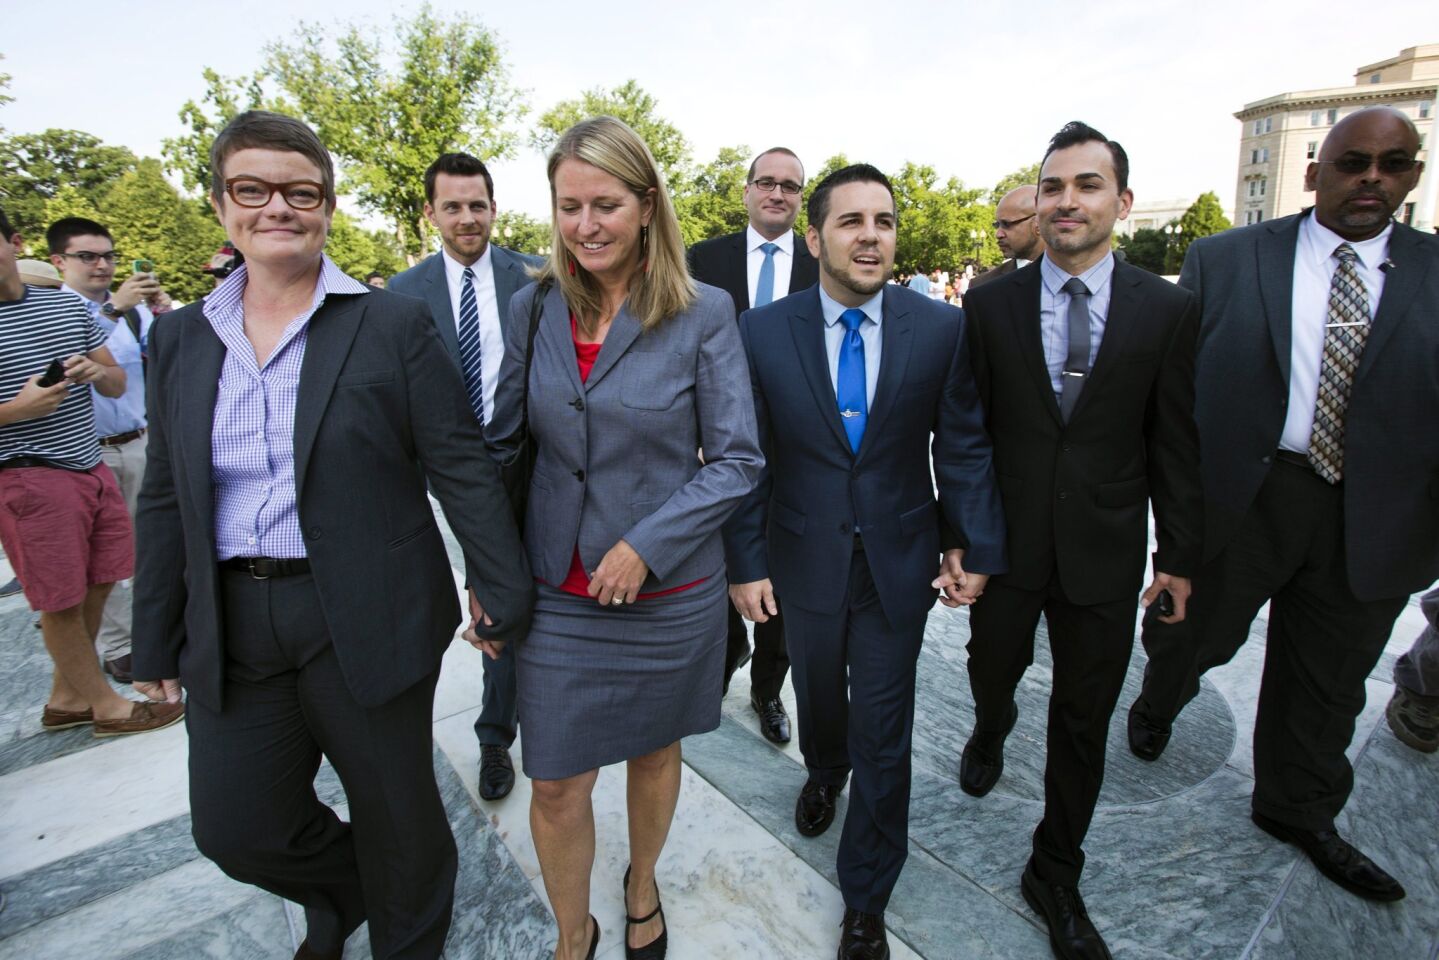 Plaintiffs Kristen Perry and Sandy Stier, left, and Jeffrey Zarrillo and Paul Katami arrive at the Supreme Court Wednesday morning to hear the high court's ruling on California's Proposition 8, which forbids on same-sex marriage.